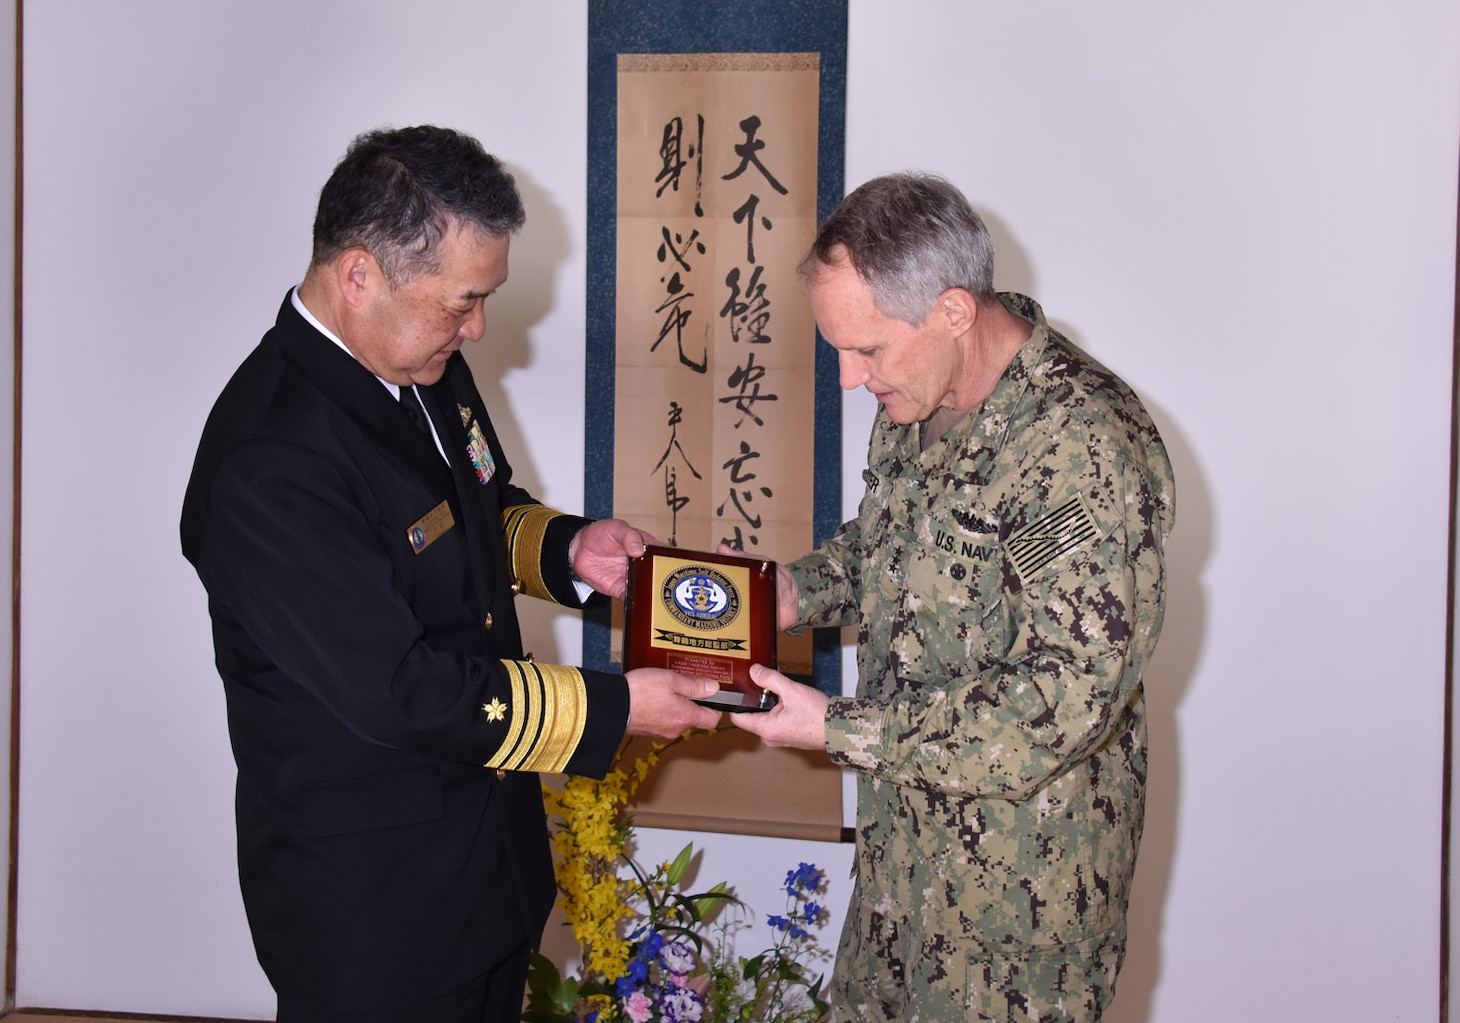 KYOTO, Japan (April 10, 2018) Vice. Adm. Phil Sawyer, commander, U.S. 7th Fleet, right, accepts a gift from Japan Maritime Self-Defense Force (JMSDF) Vice Adm. Takehisa Nakao, commandant of the JMSDF Maizuru District, during a visit to the Maizuru District headquarters in Kyoto. Sawyer visited Kyoto to reinforce 7th Fleet’s close, long-standing partnership with the JMSDF throughout Japan.